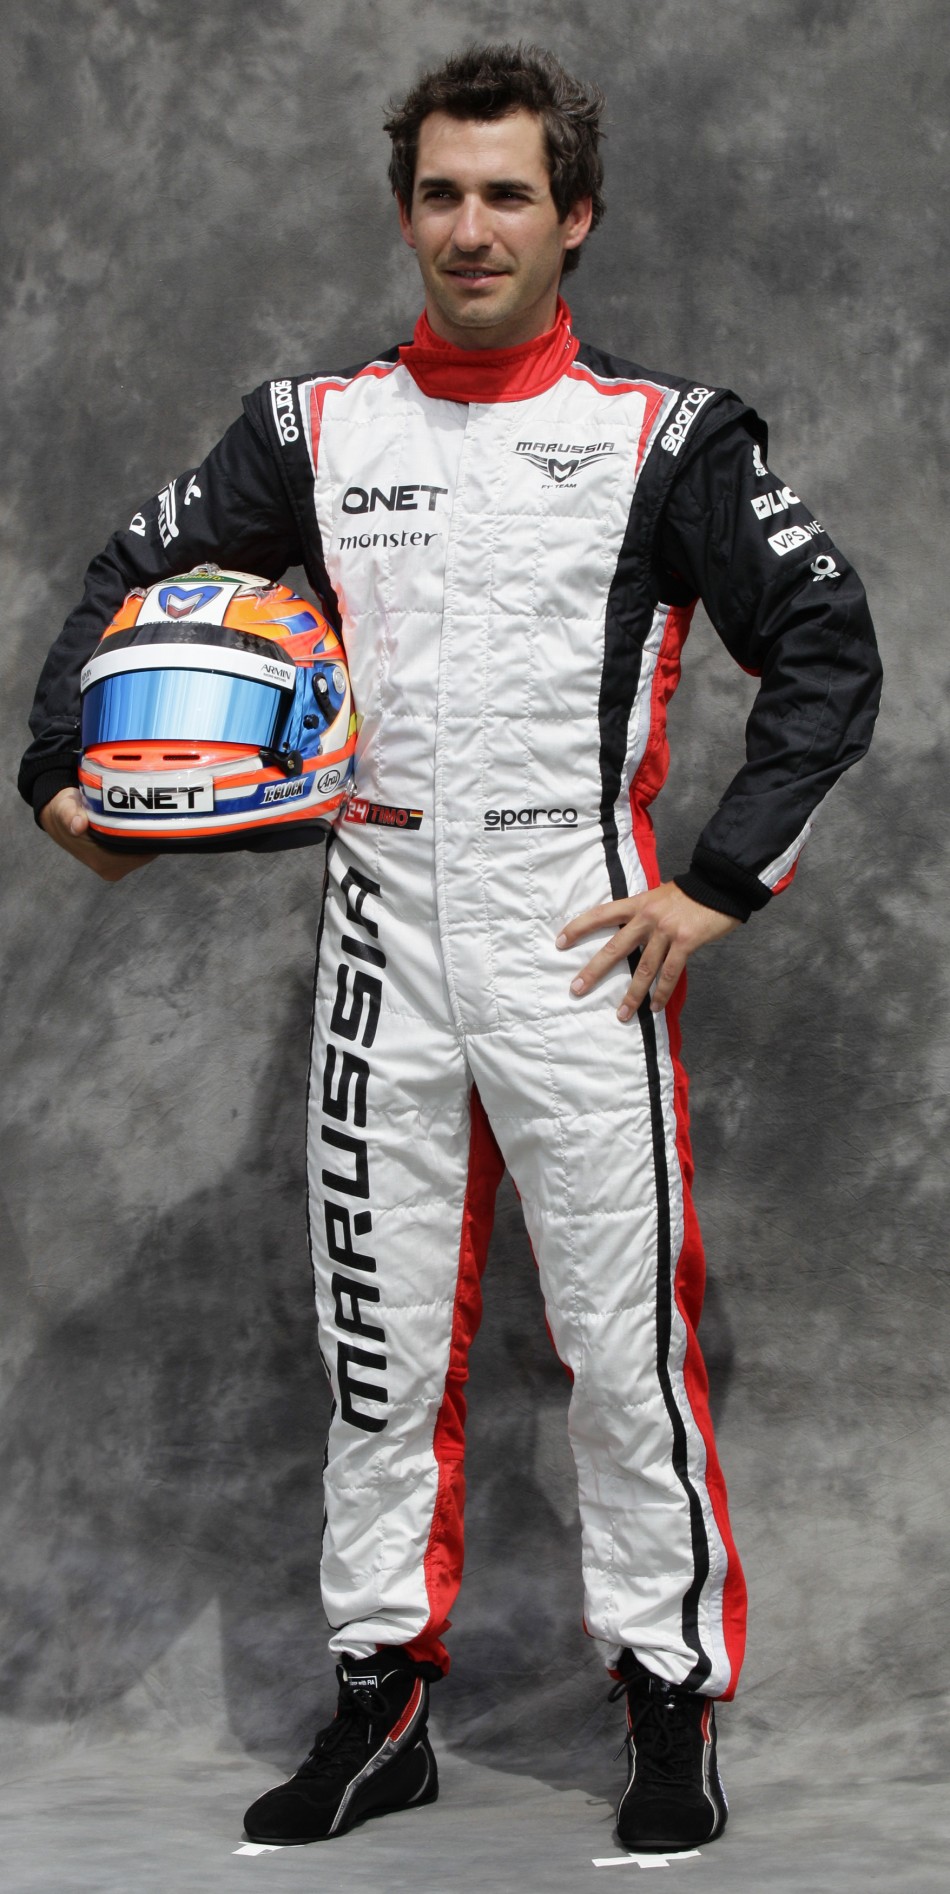 Marussia Formula One driver Glock poses prior to the Australian F1 Grand Prix at the Albert Park circuit in Melbourne